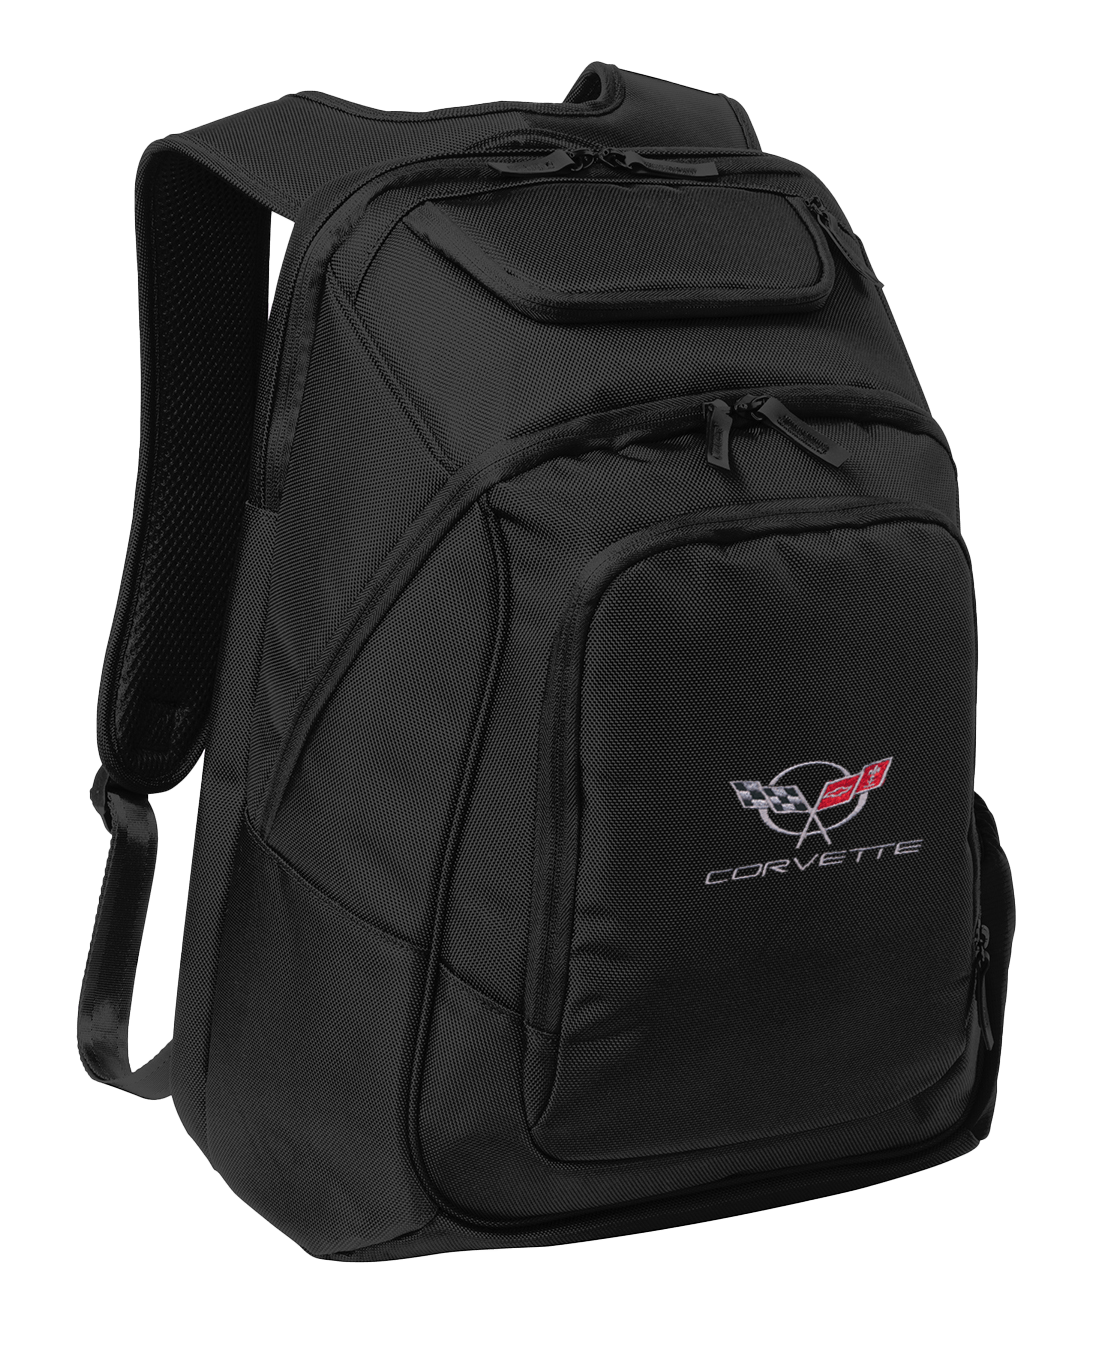 c5-corvette-embroidered-backpack